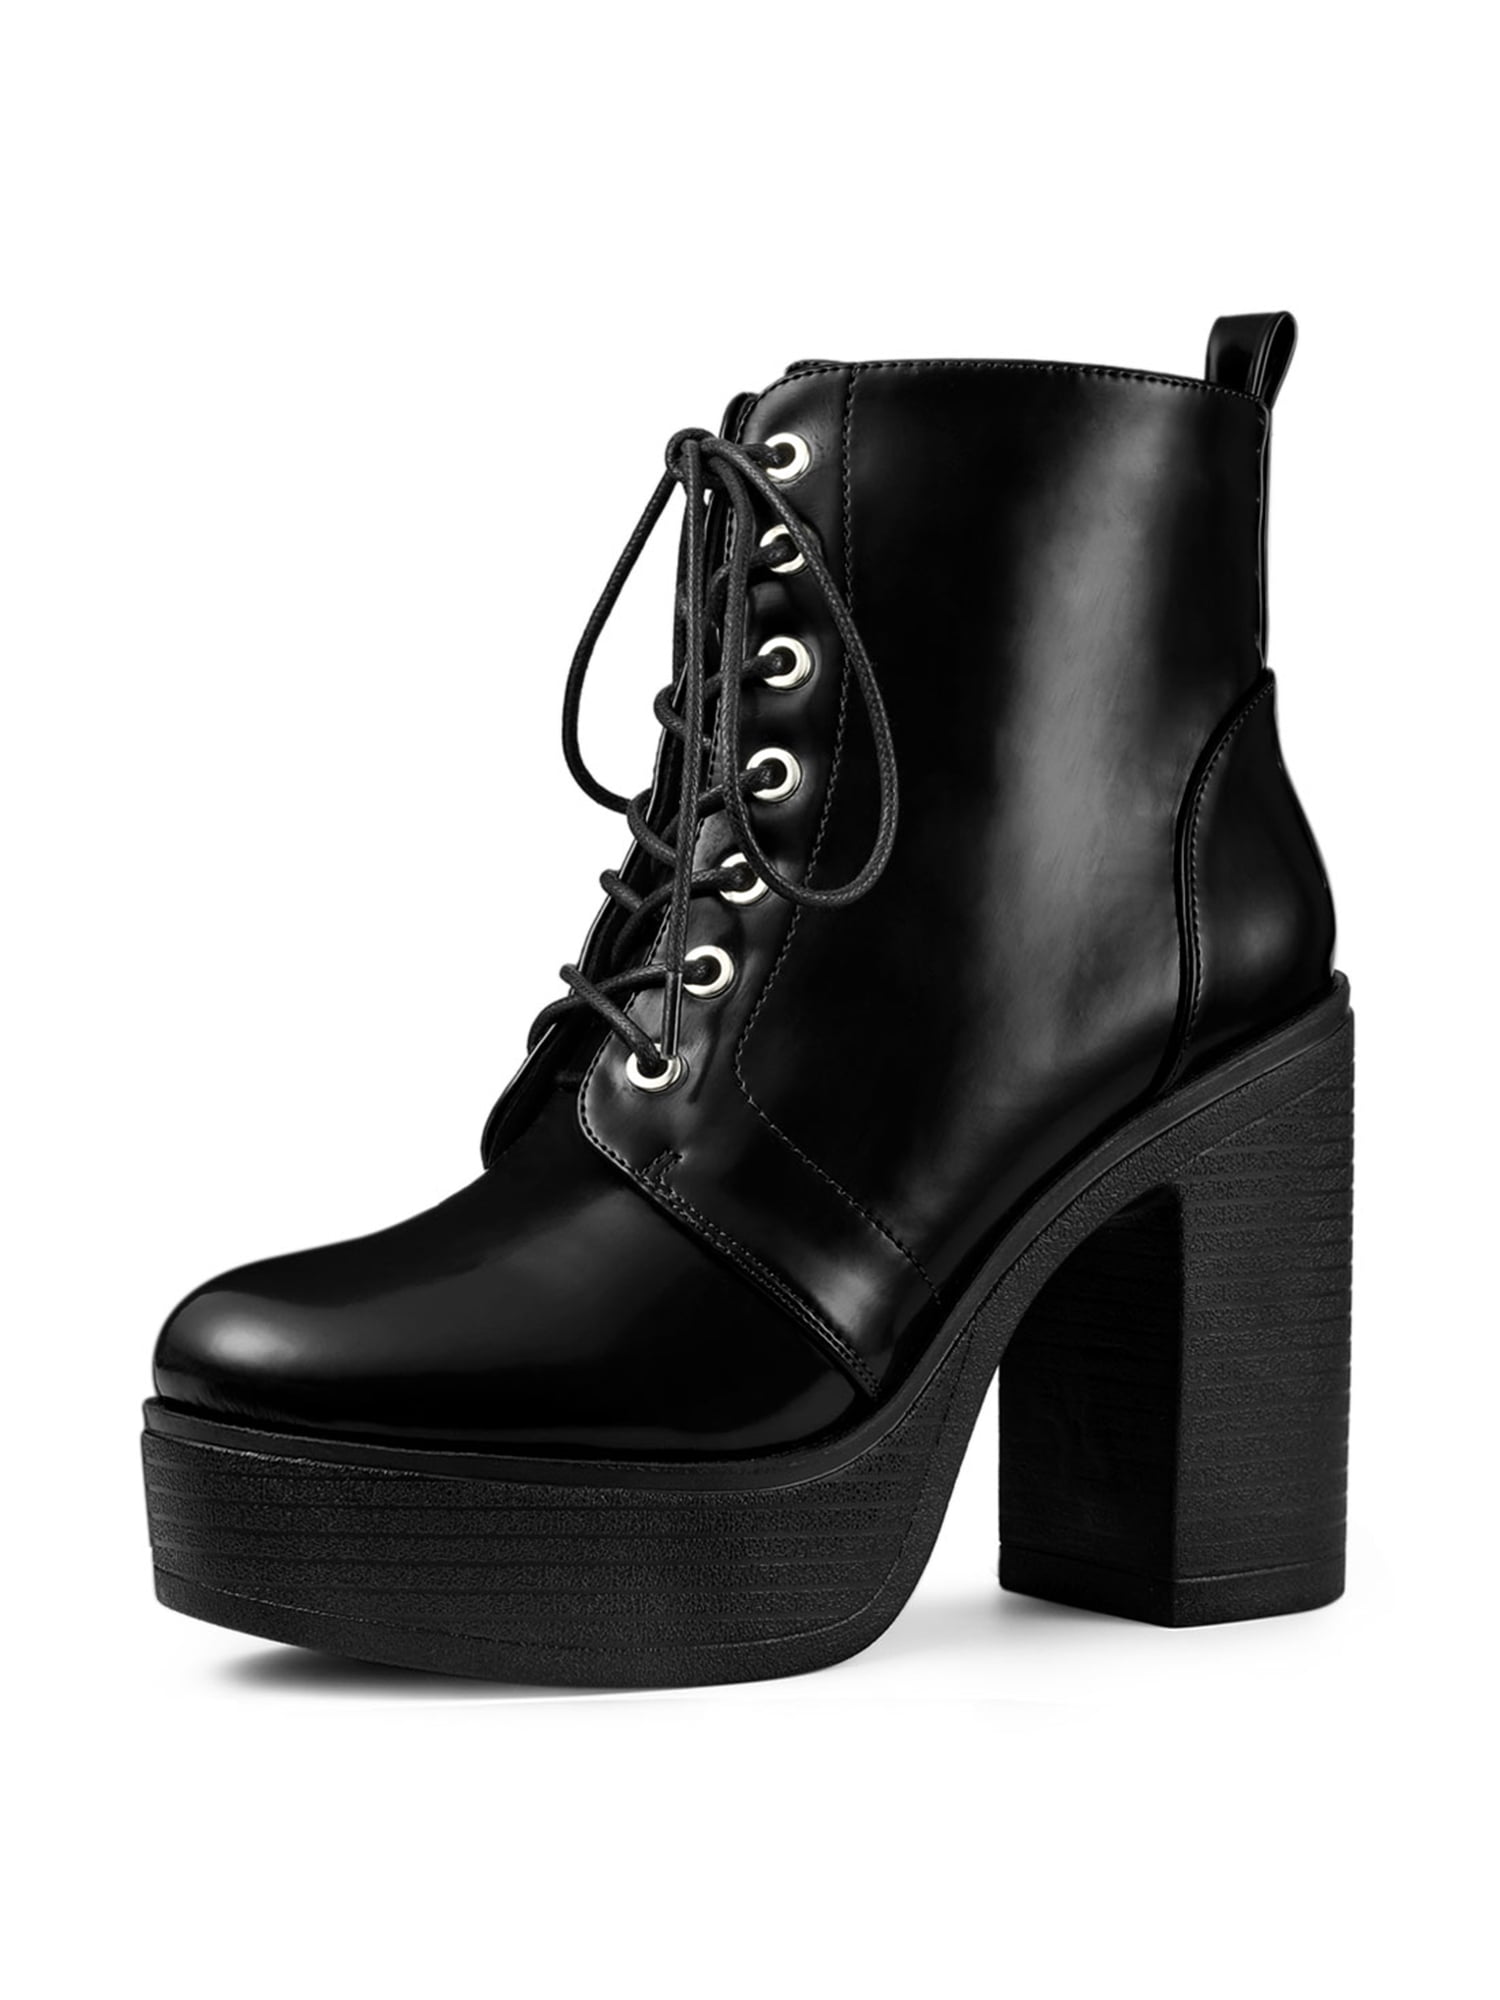 leather combat boots with heel